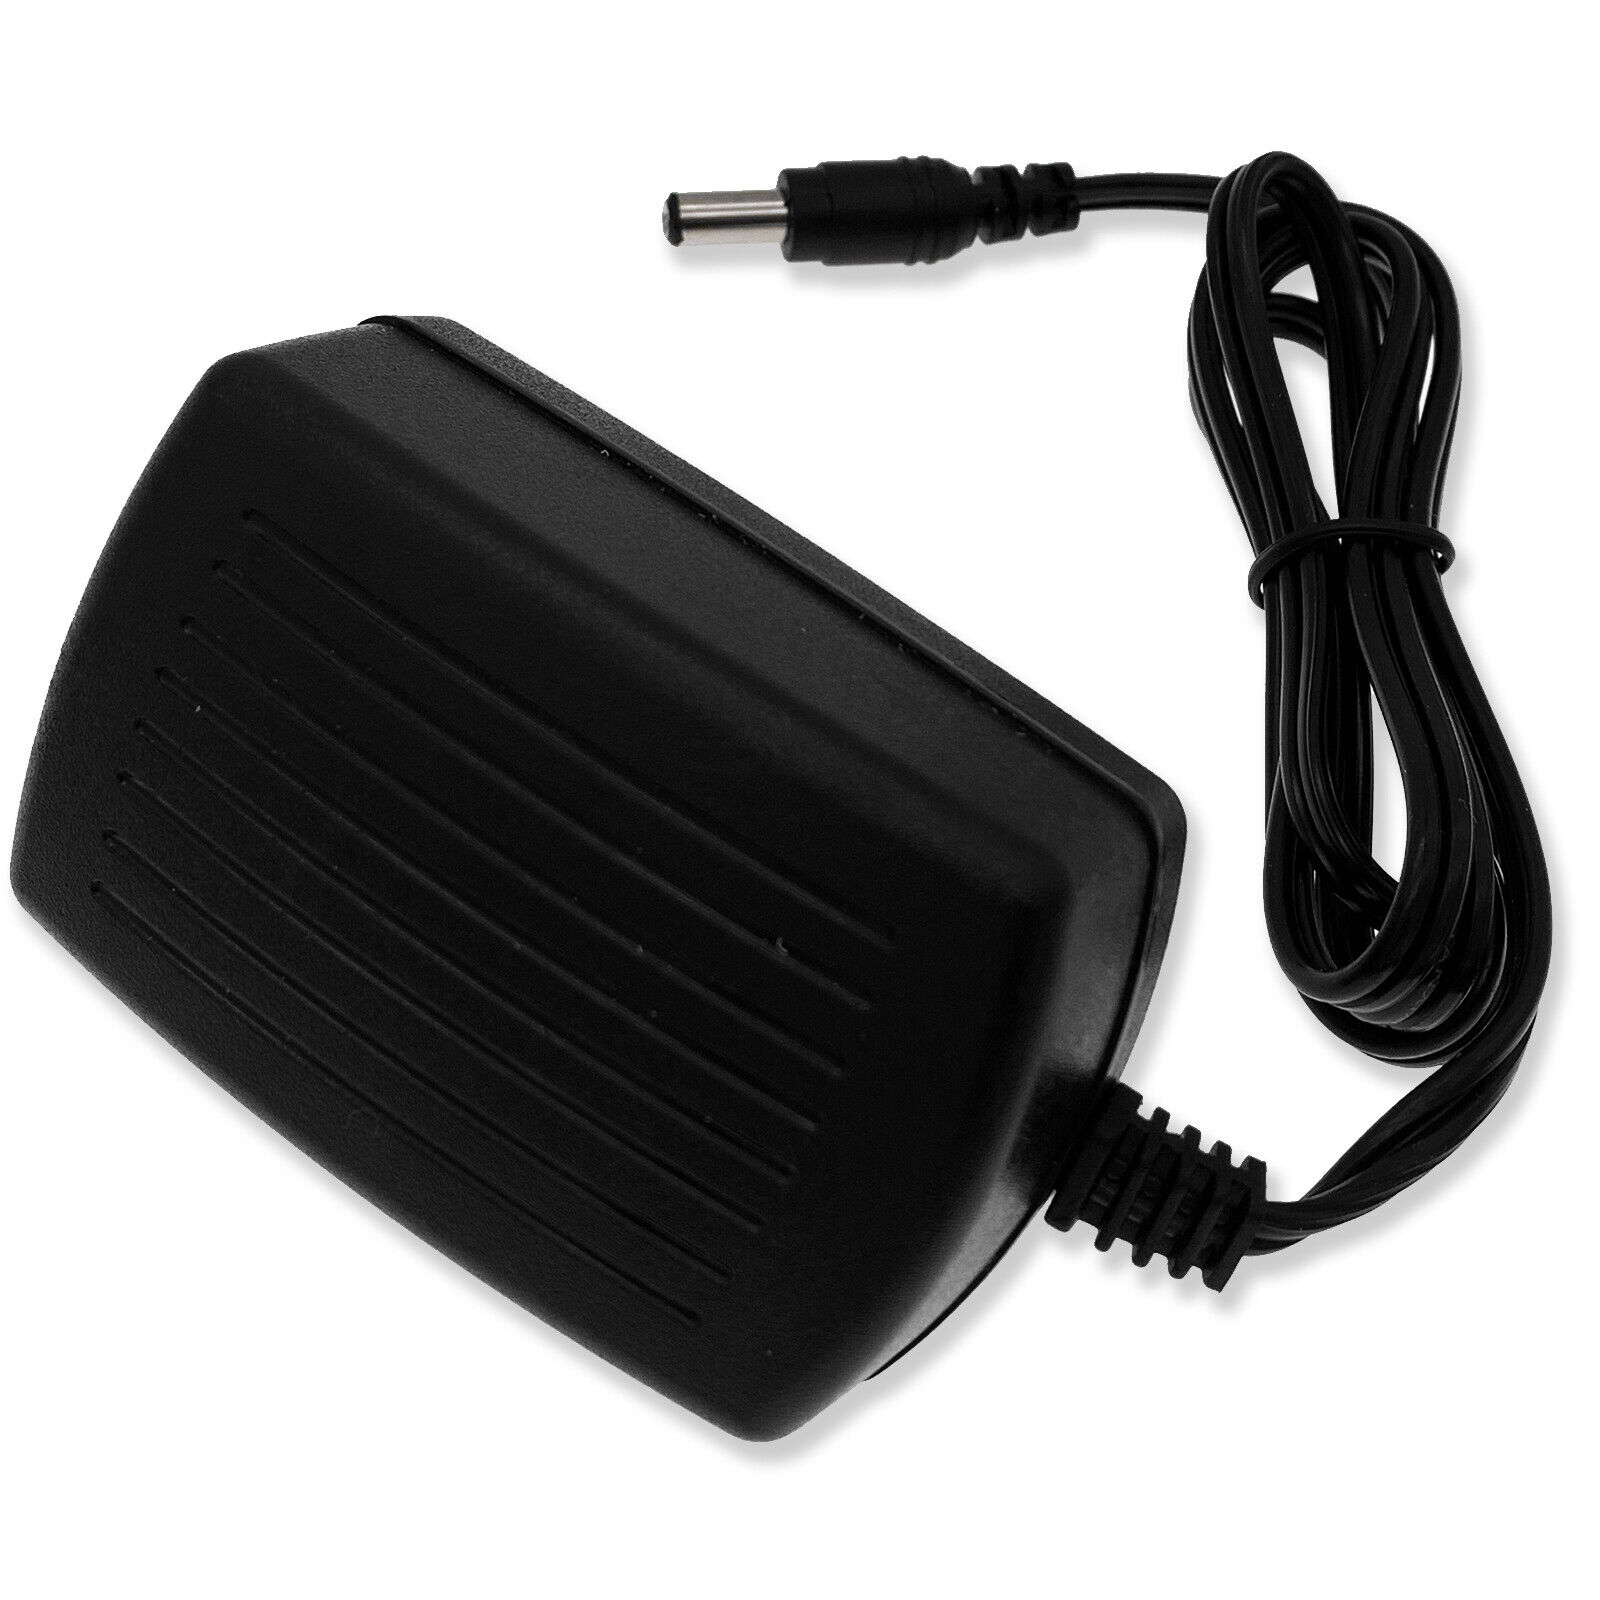 Replacement for Zoom H4N Power Adapter Compatible with Zoom H4n Pro, R16, AD-14, ARQ AR-96, AR-48, UAC-2, Q3, Q3HD and R